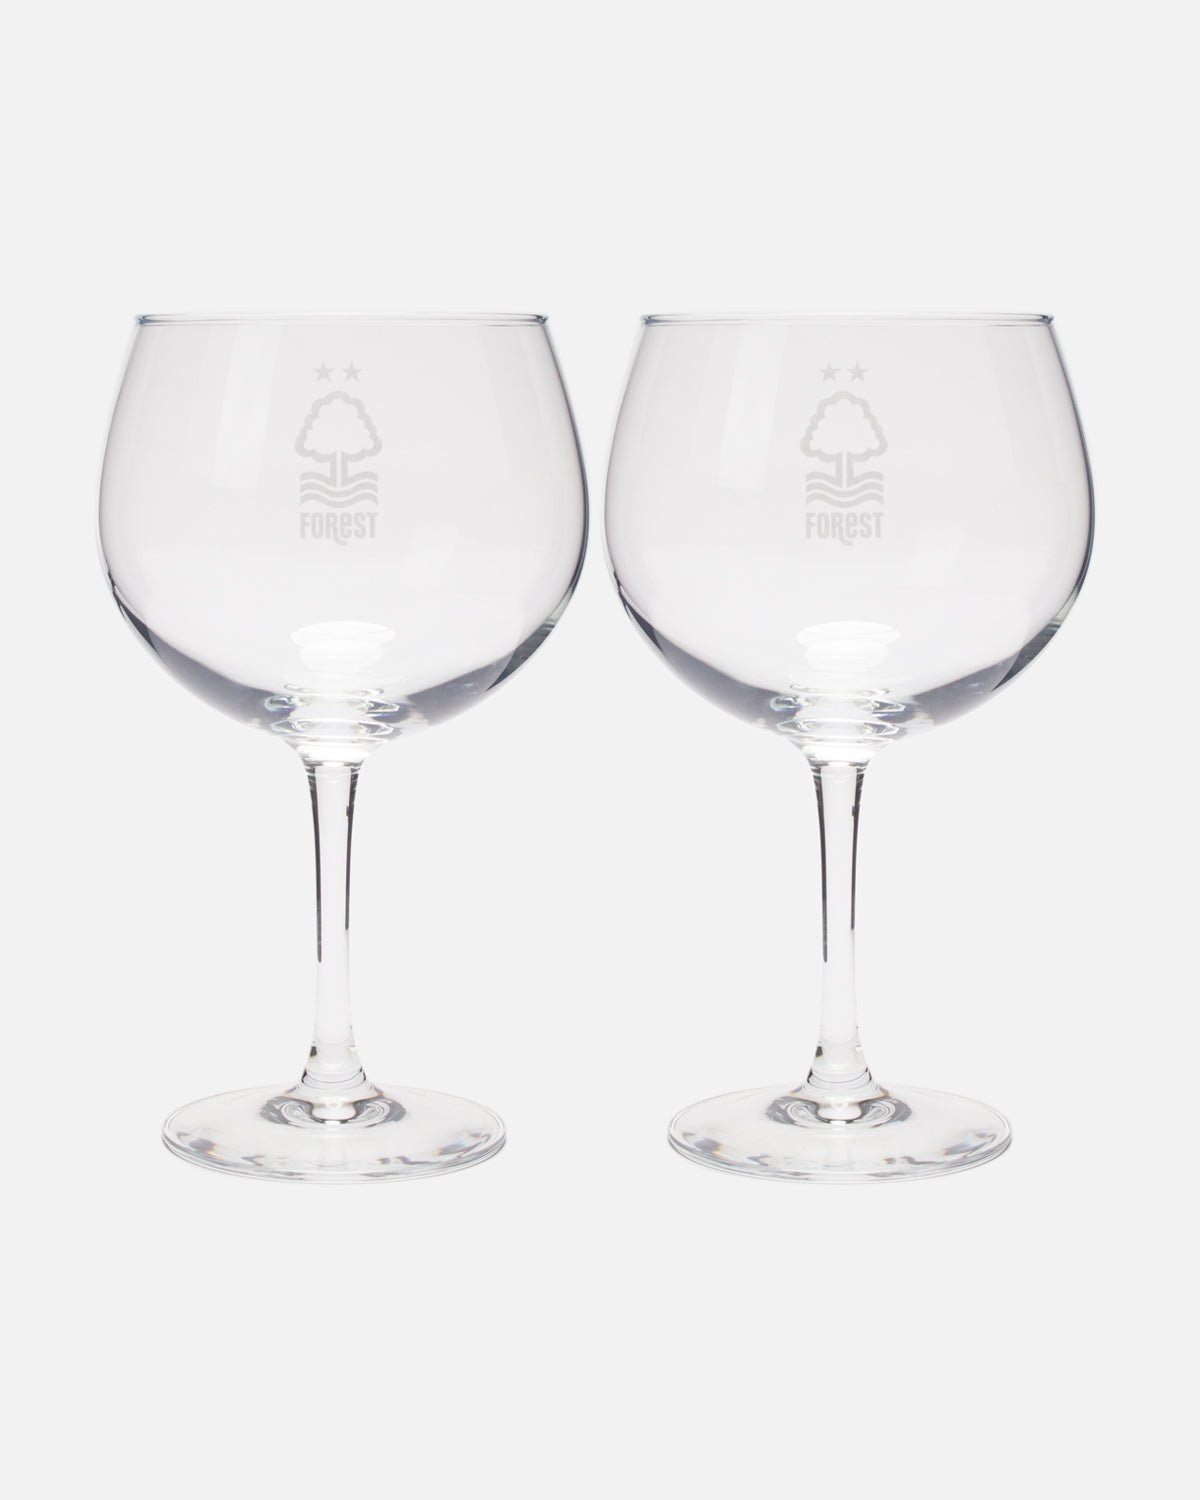 NFFC Twin Set Gin Glasses - Nottingham Forest FC